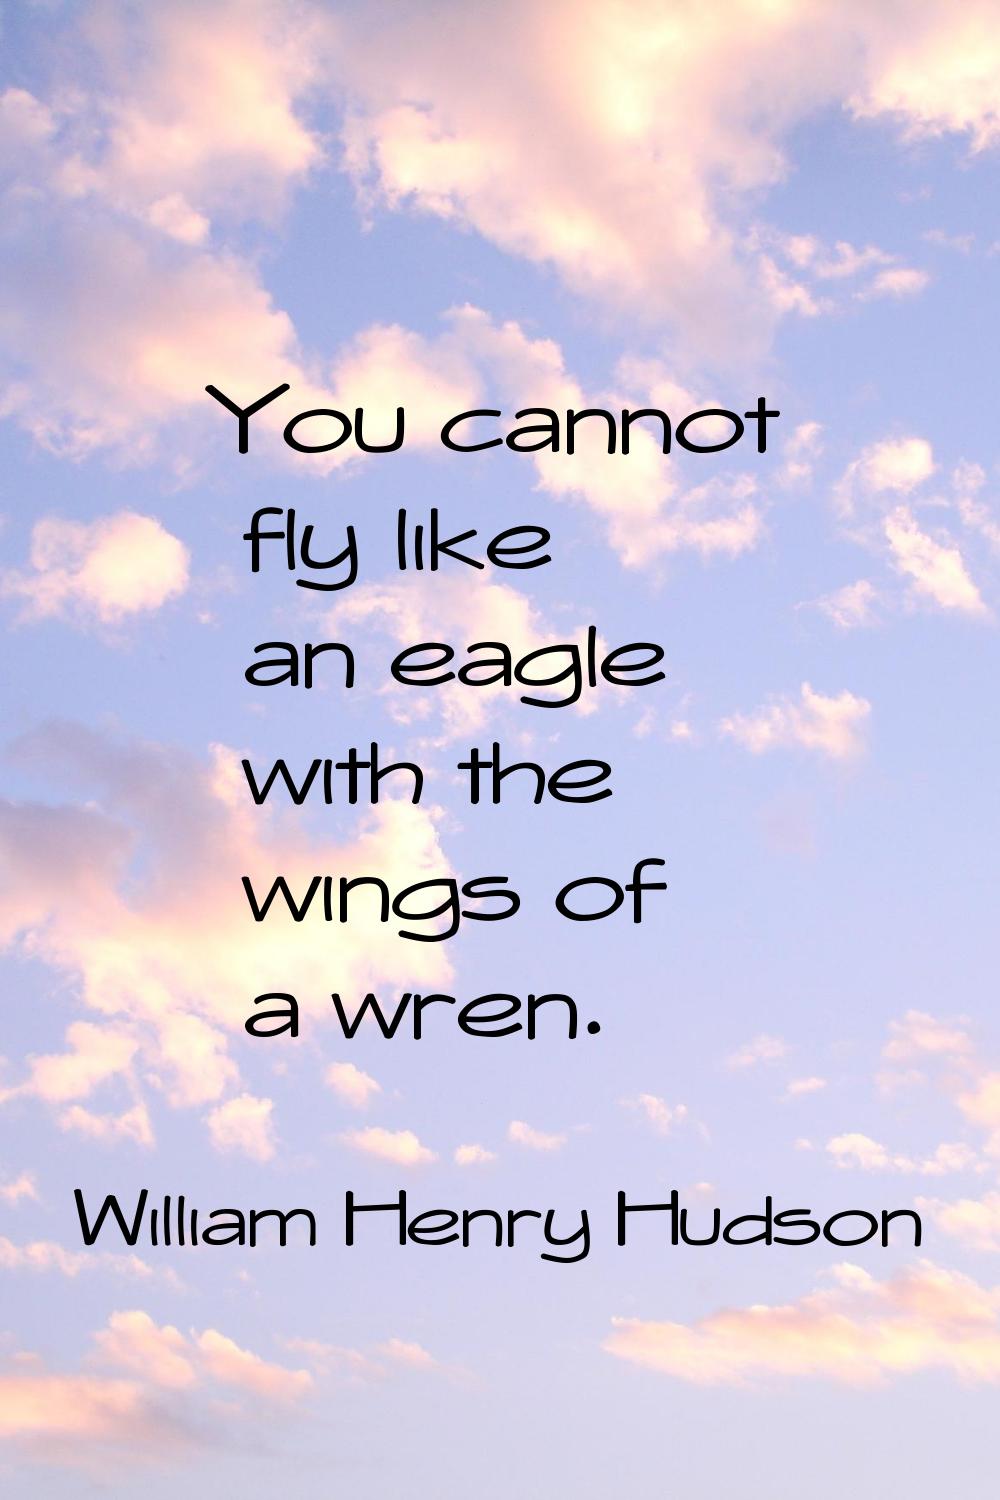 You cannot fly like an eagle with the wings of a wren.